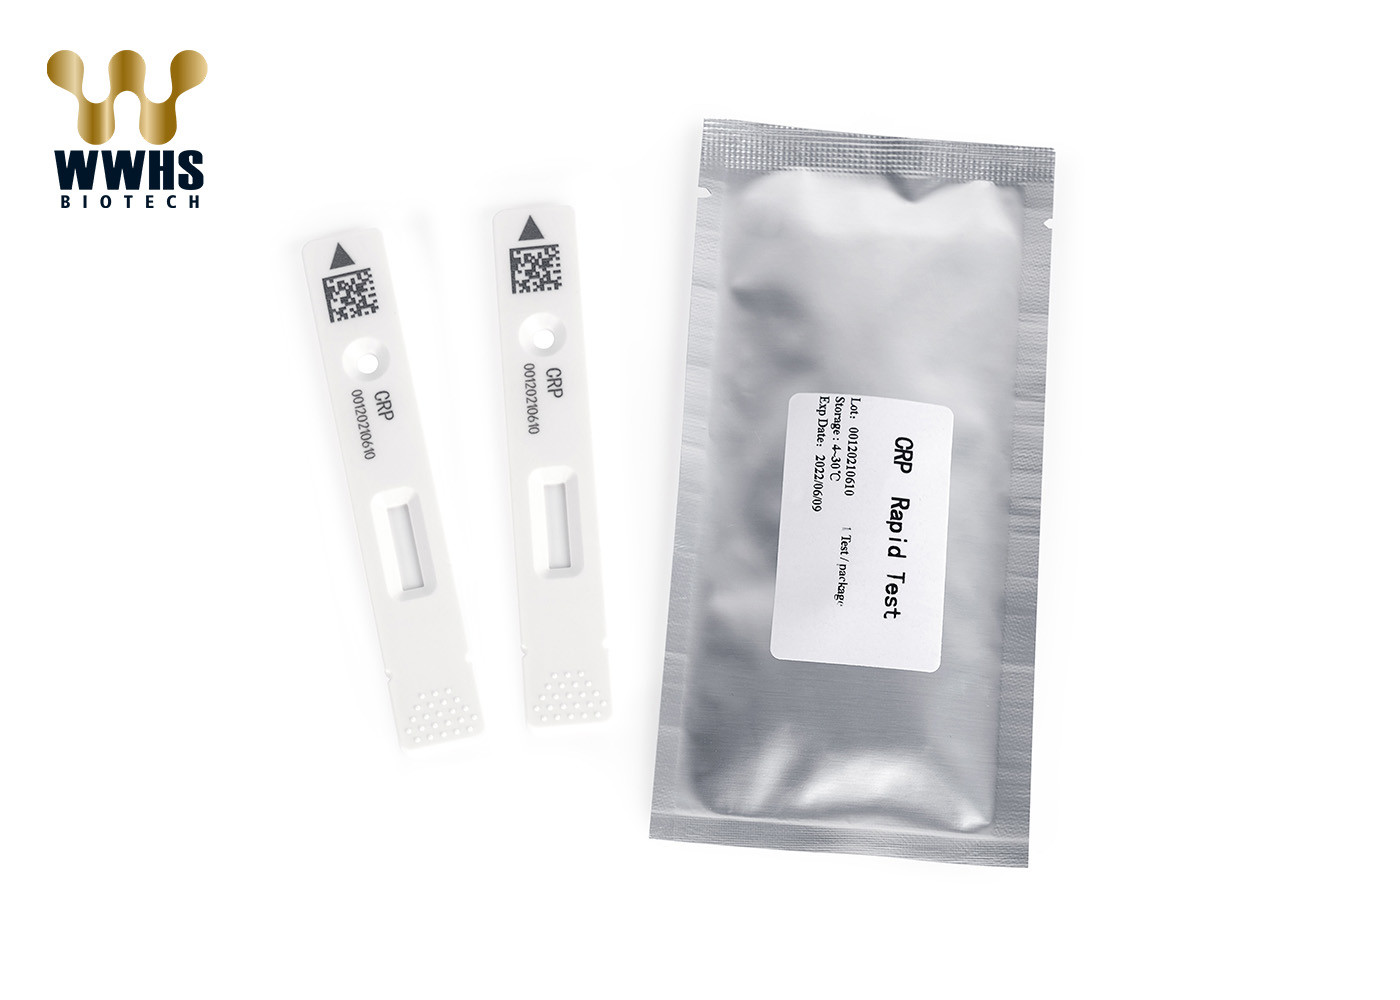 Human C-Reactive Protein Test Kit 25T POCT IVD Assay in whole blood, plasma and serum